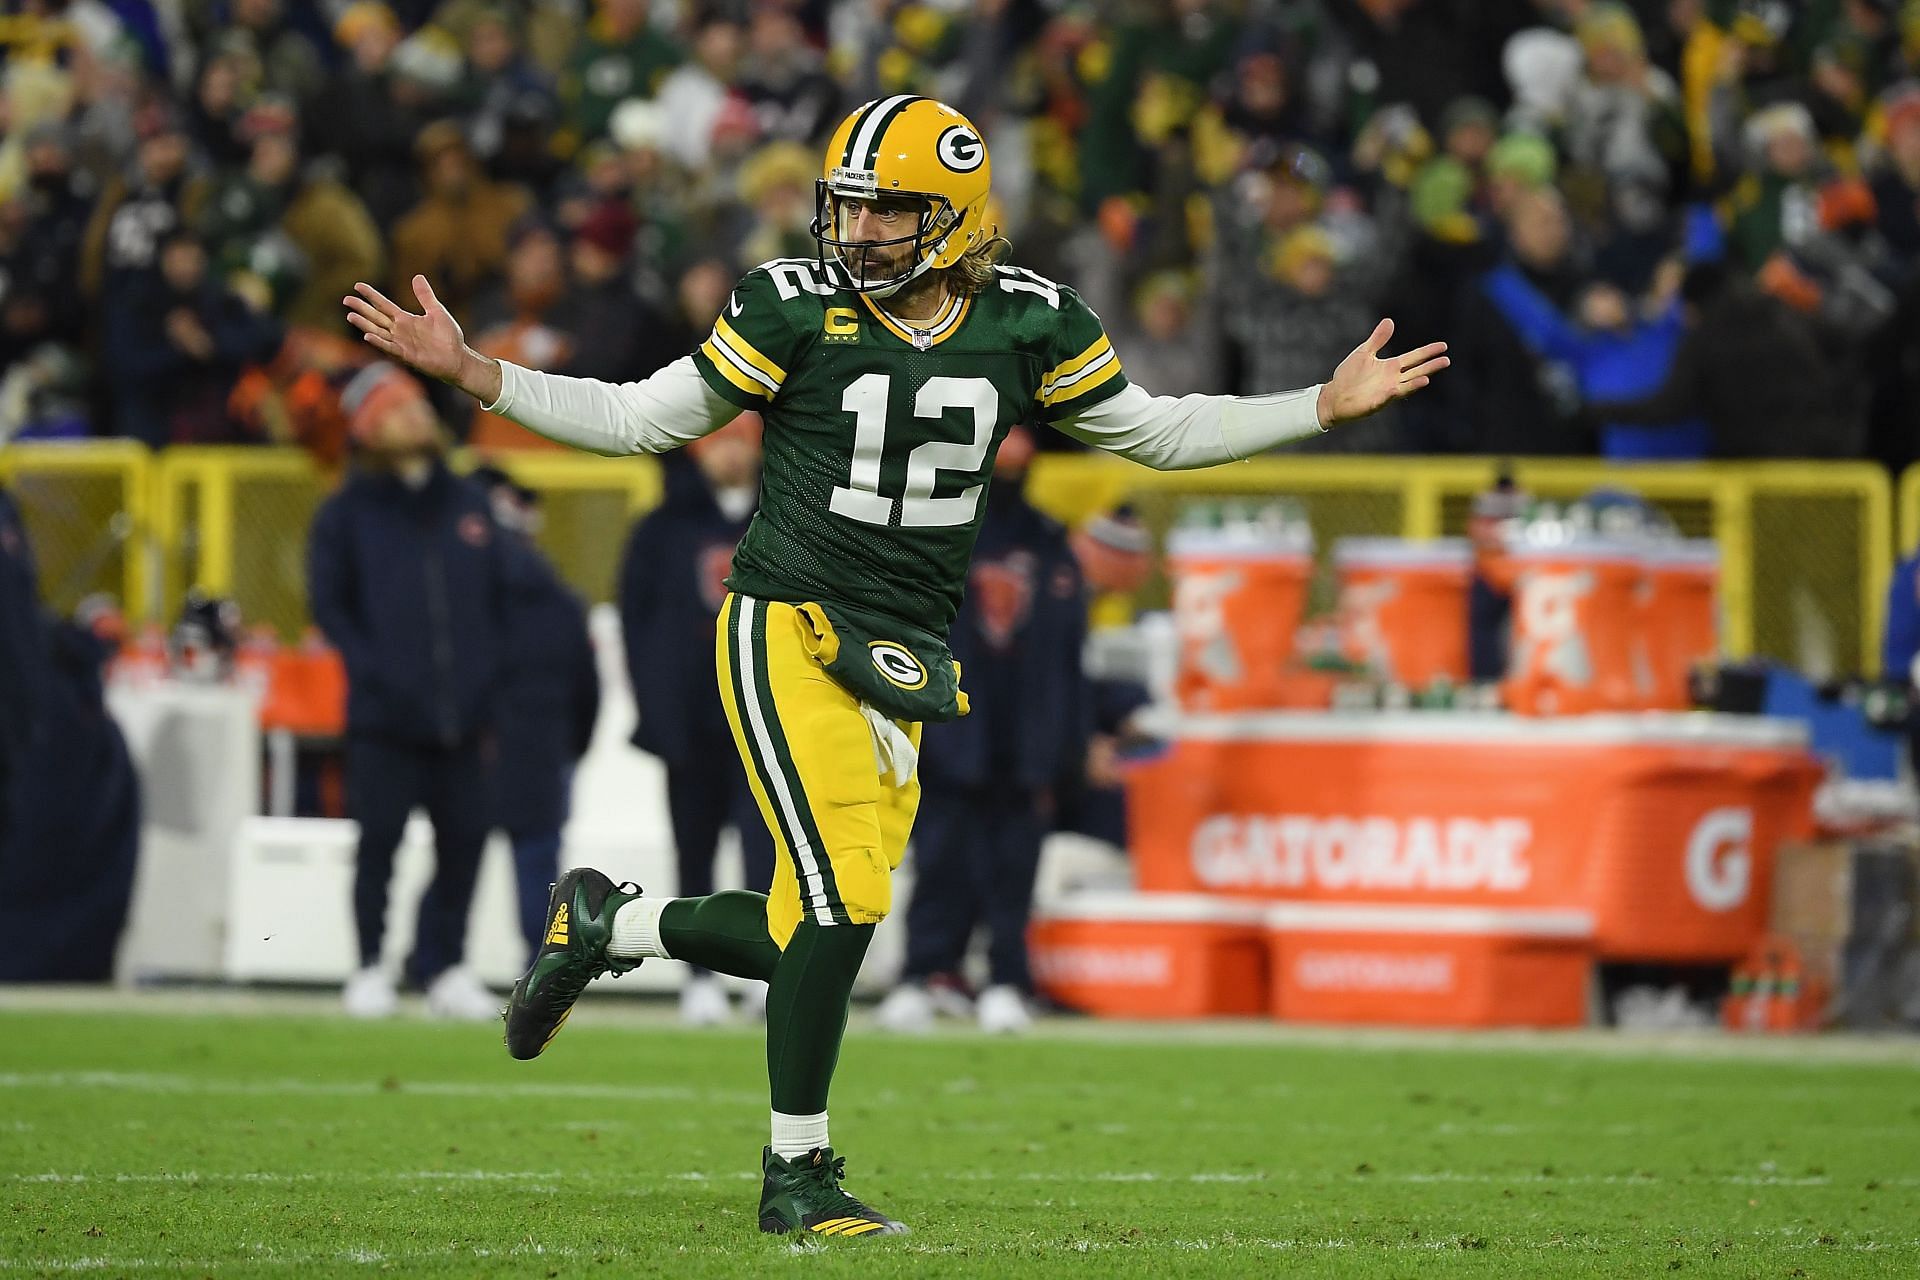 Aaron Rodgers and the Green Bay Packers are now the No. 1 seed in the NFC